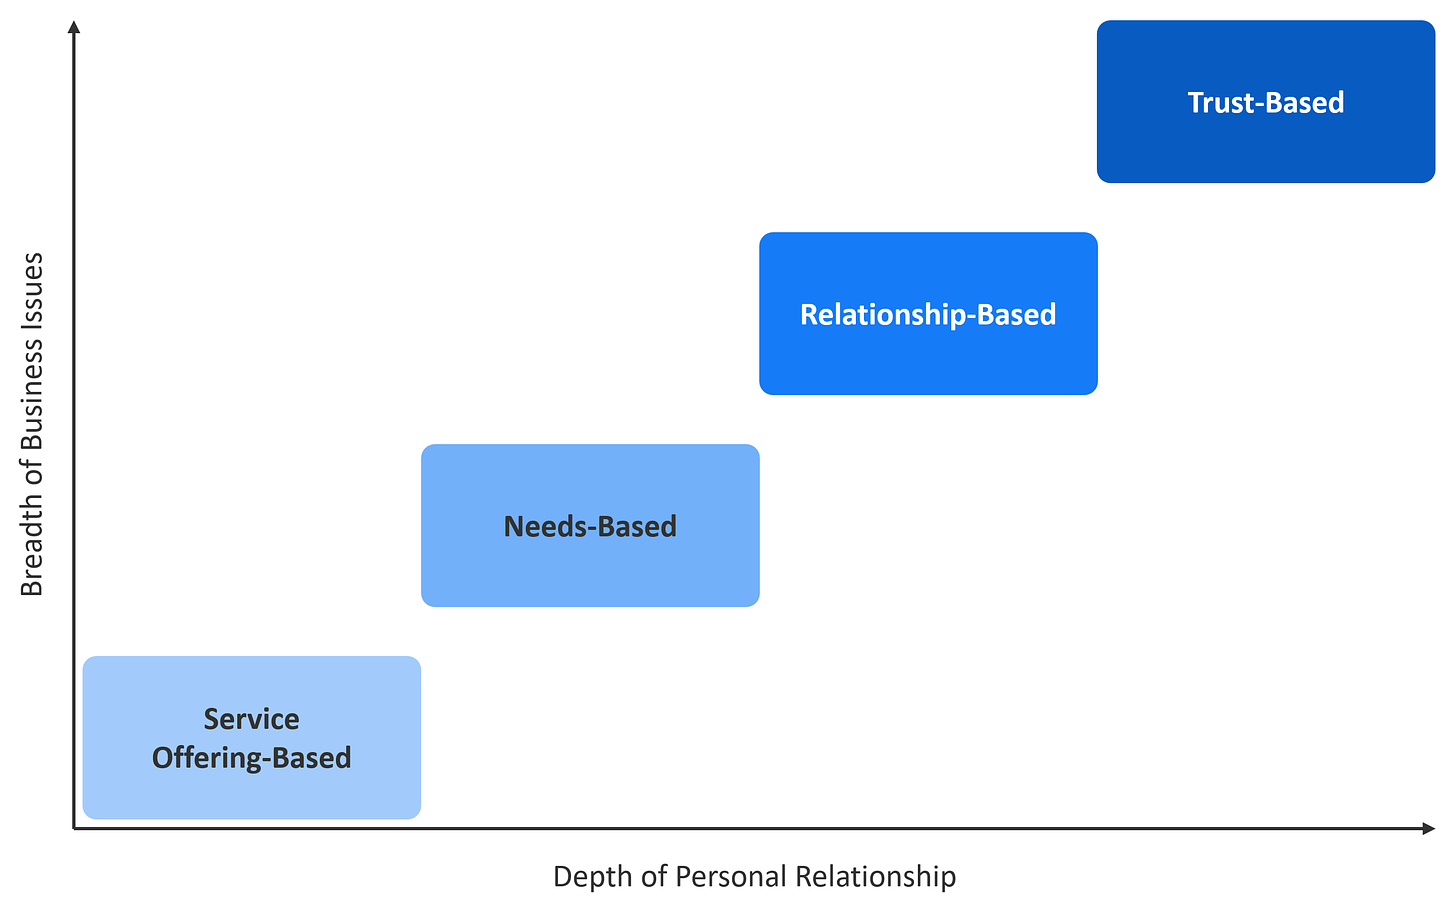 A chart where the x-axis is Depth of Personal Relationship, and the y-axis is Breadth of Business Issues. Four types of advisory relationships are plotted, starting from the lower left and moving up and to the right: Service Offering-Based, Needs-Based, Relationship-Based, and Trust-Based on the top right.